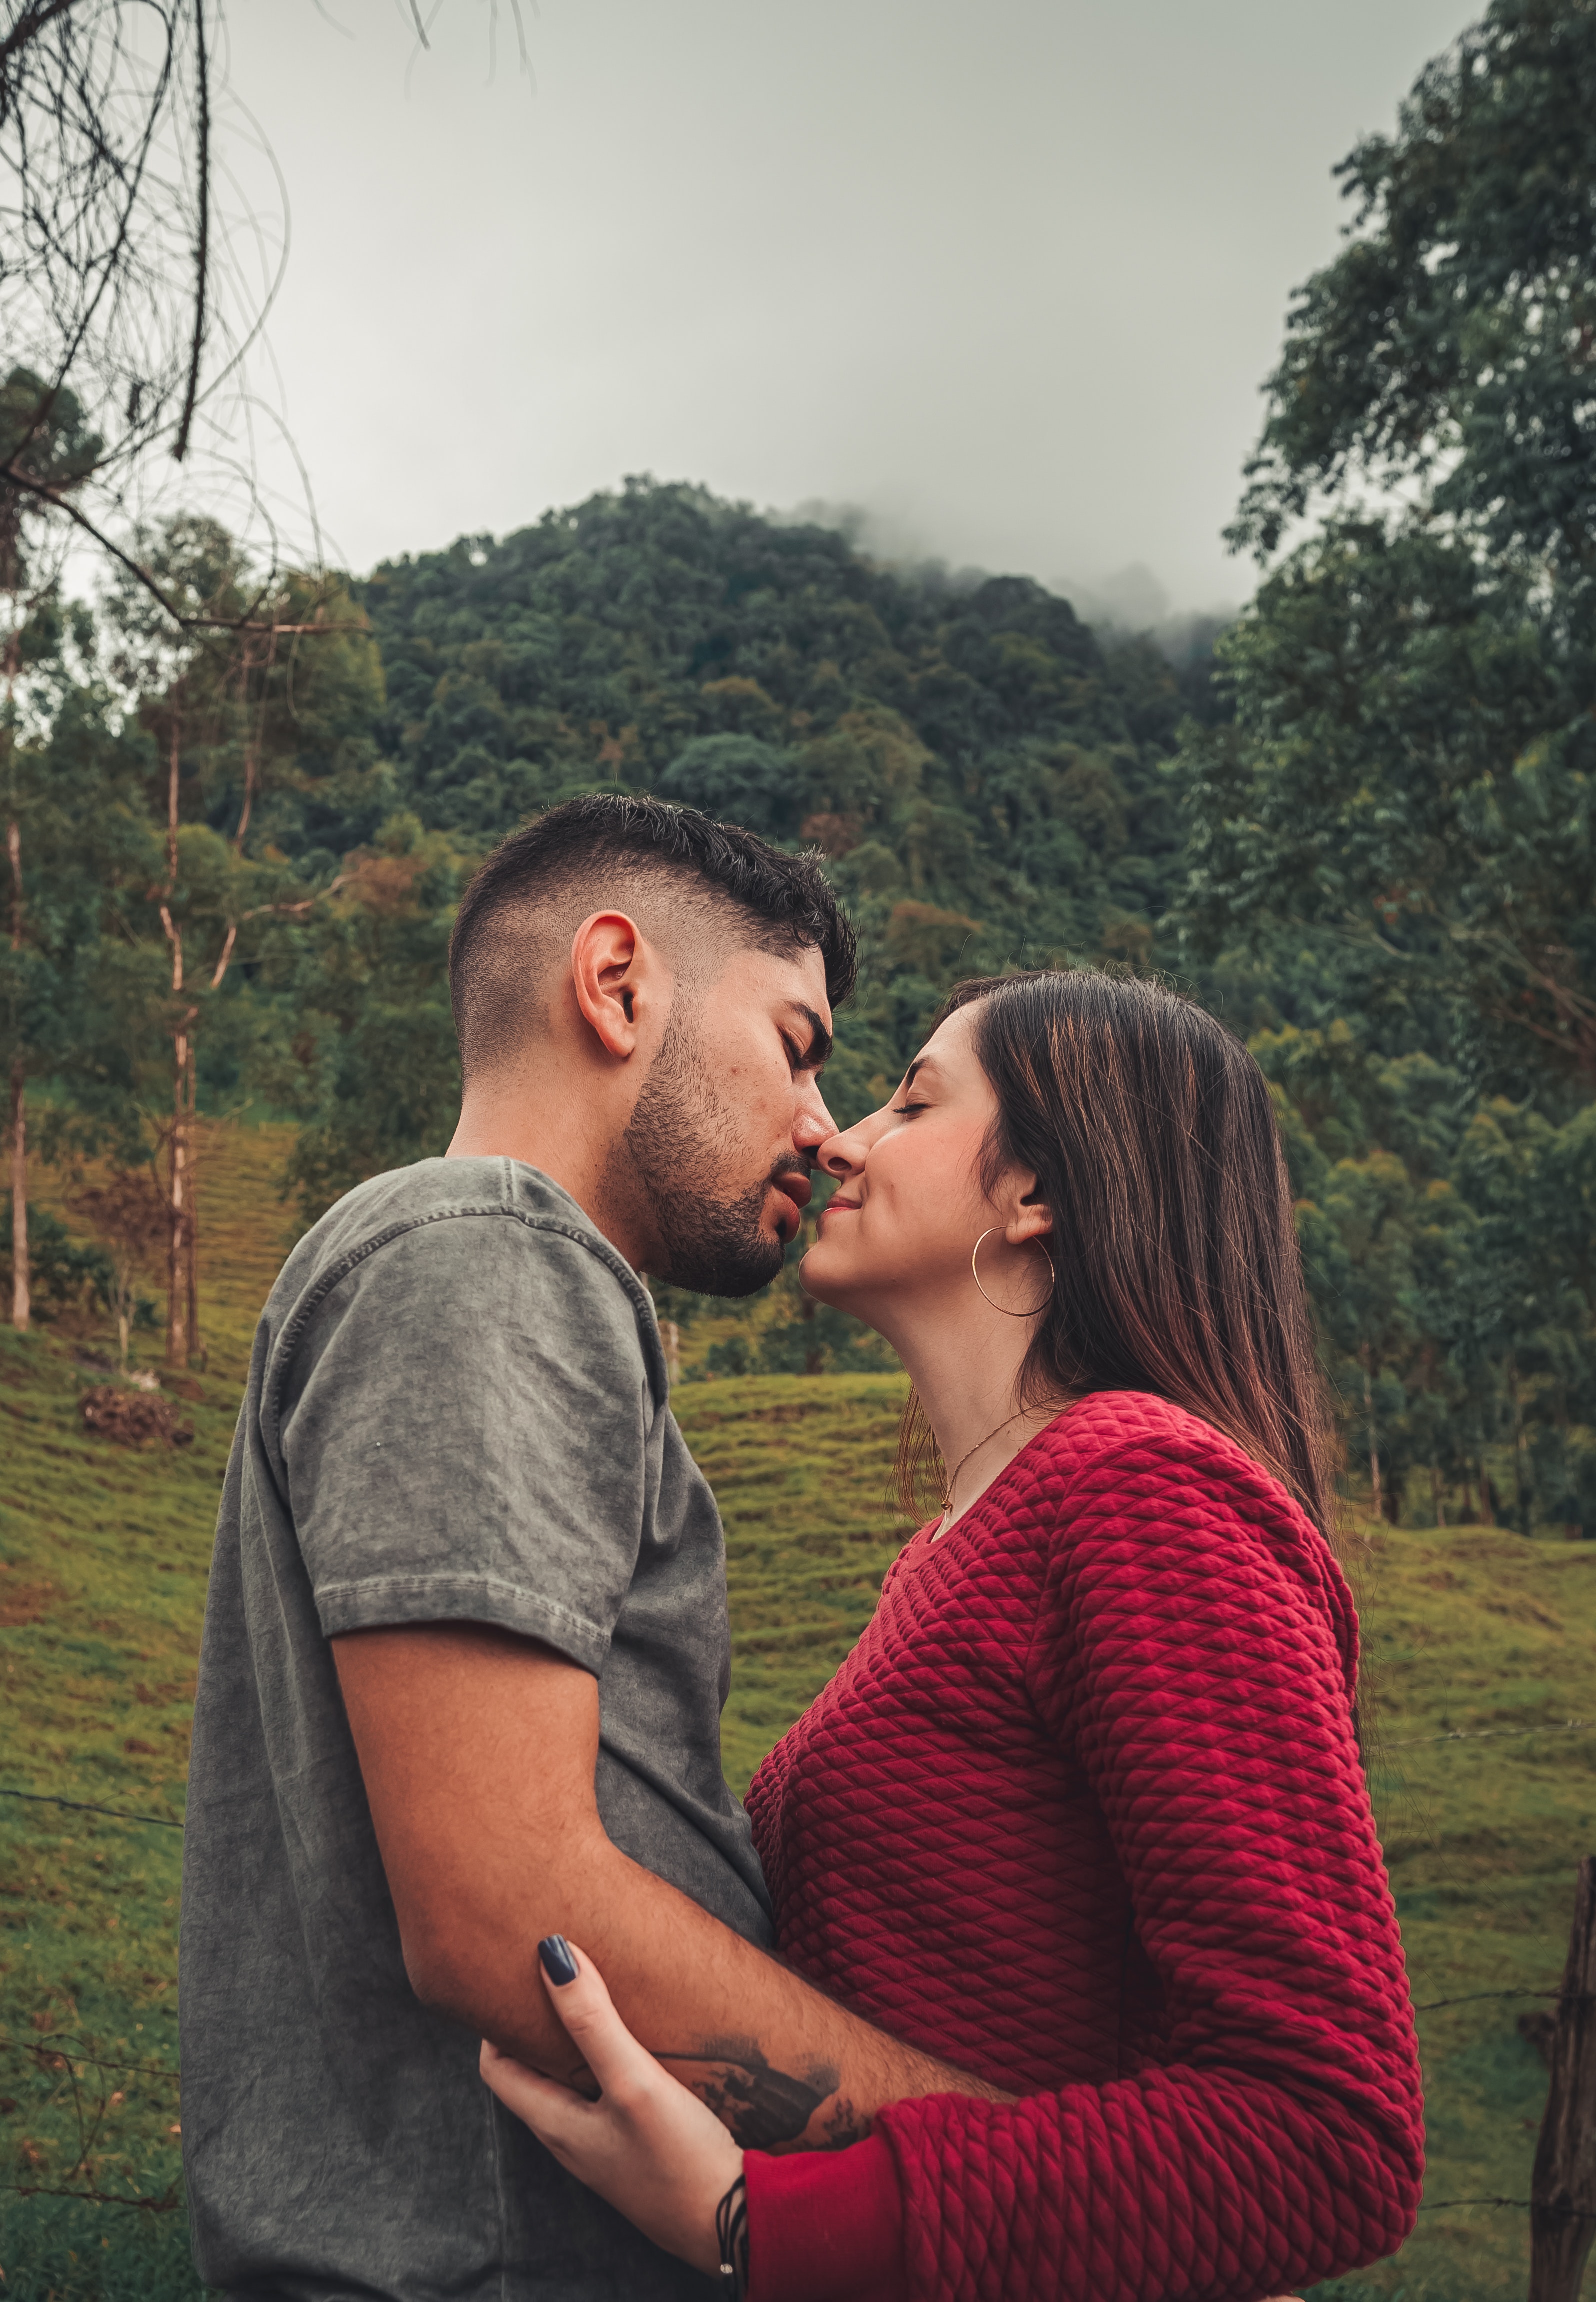 Couple about to kiss | Source: Pexels